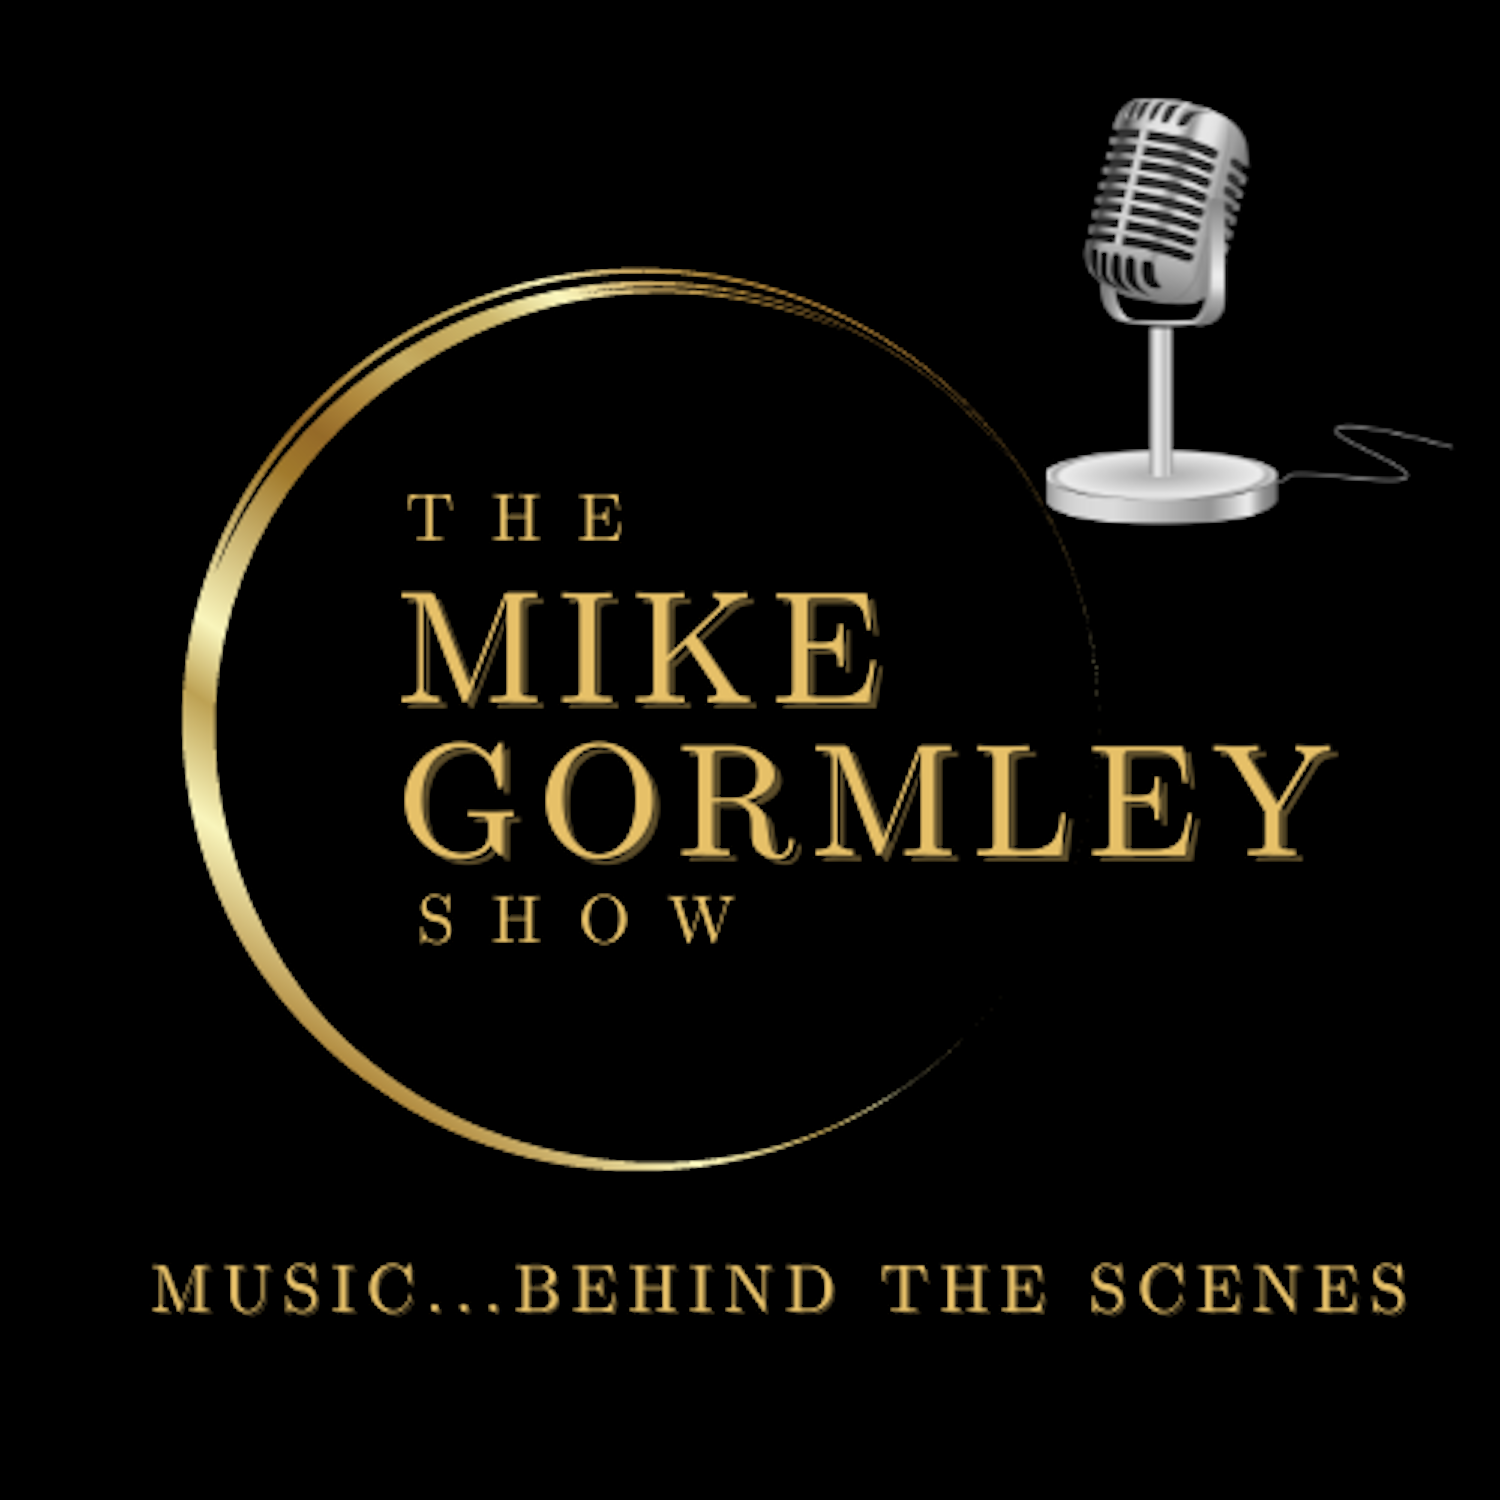 The Mike Gormley Show